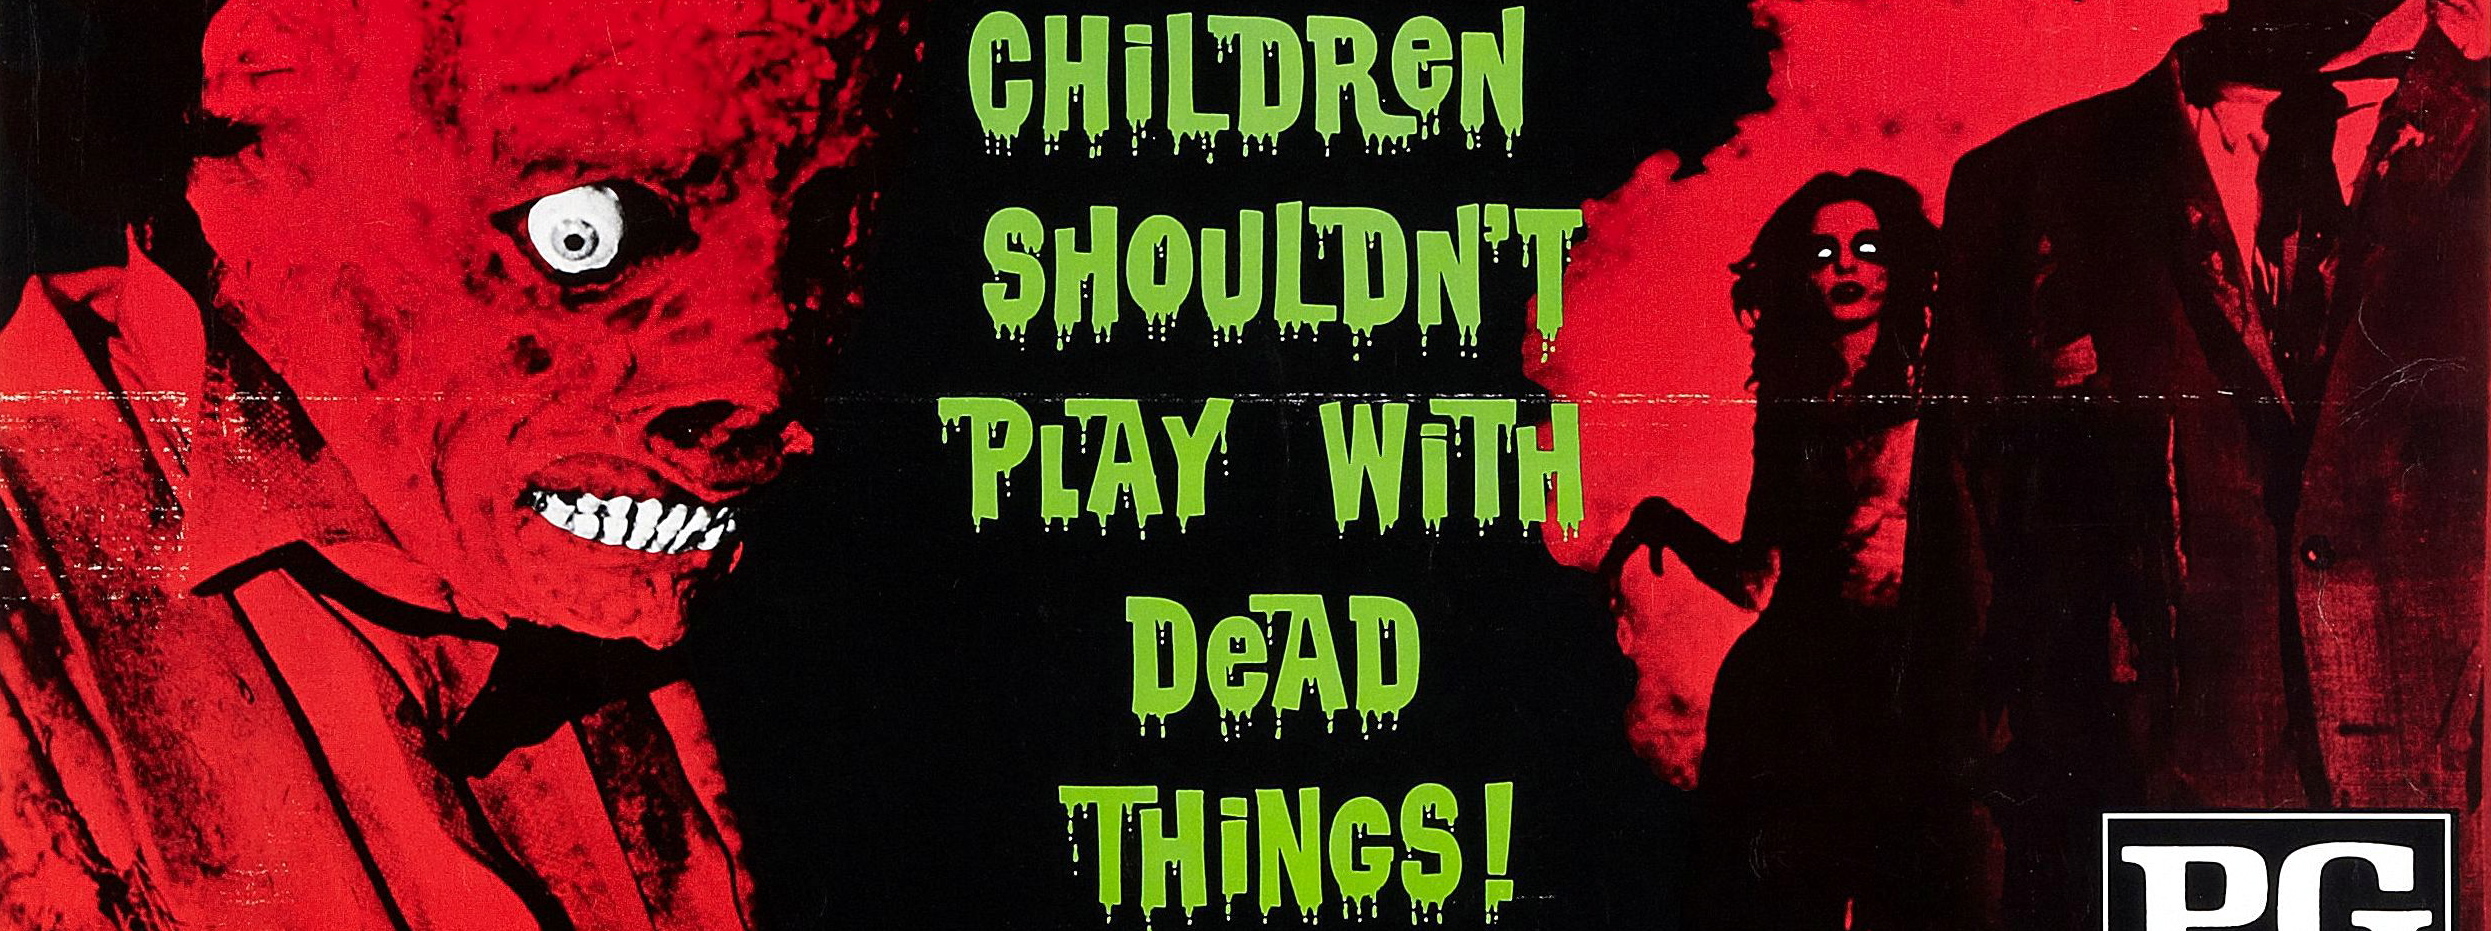 Children Shouldn't Play With Dead Things Pics, Movie Collection